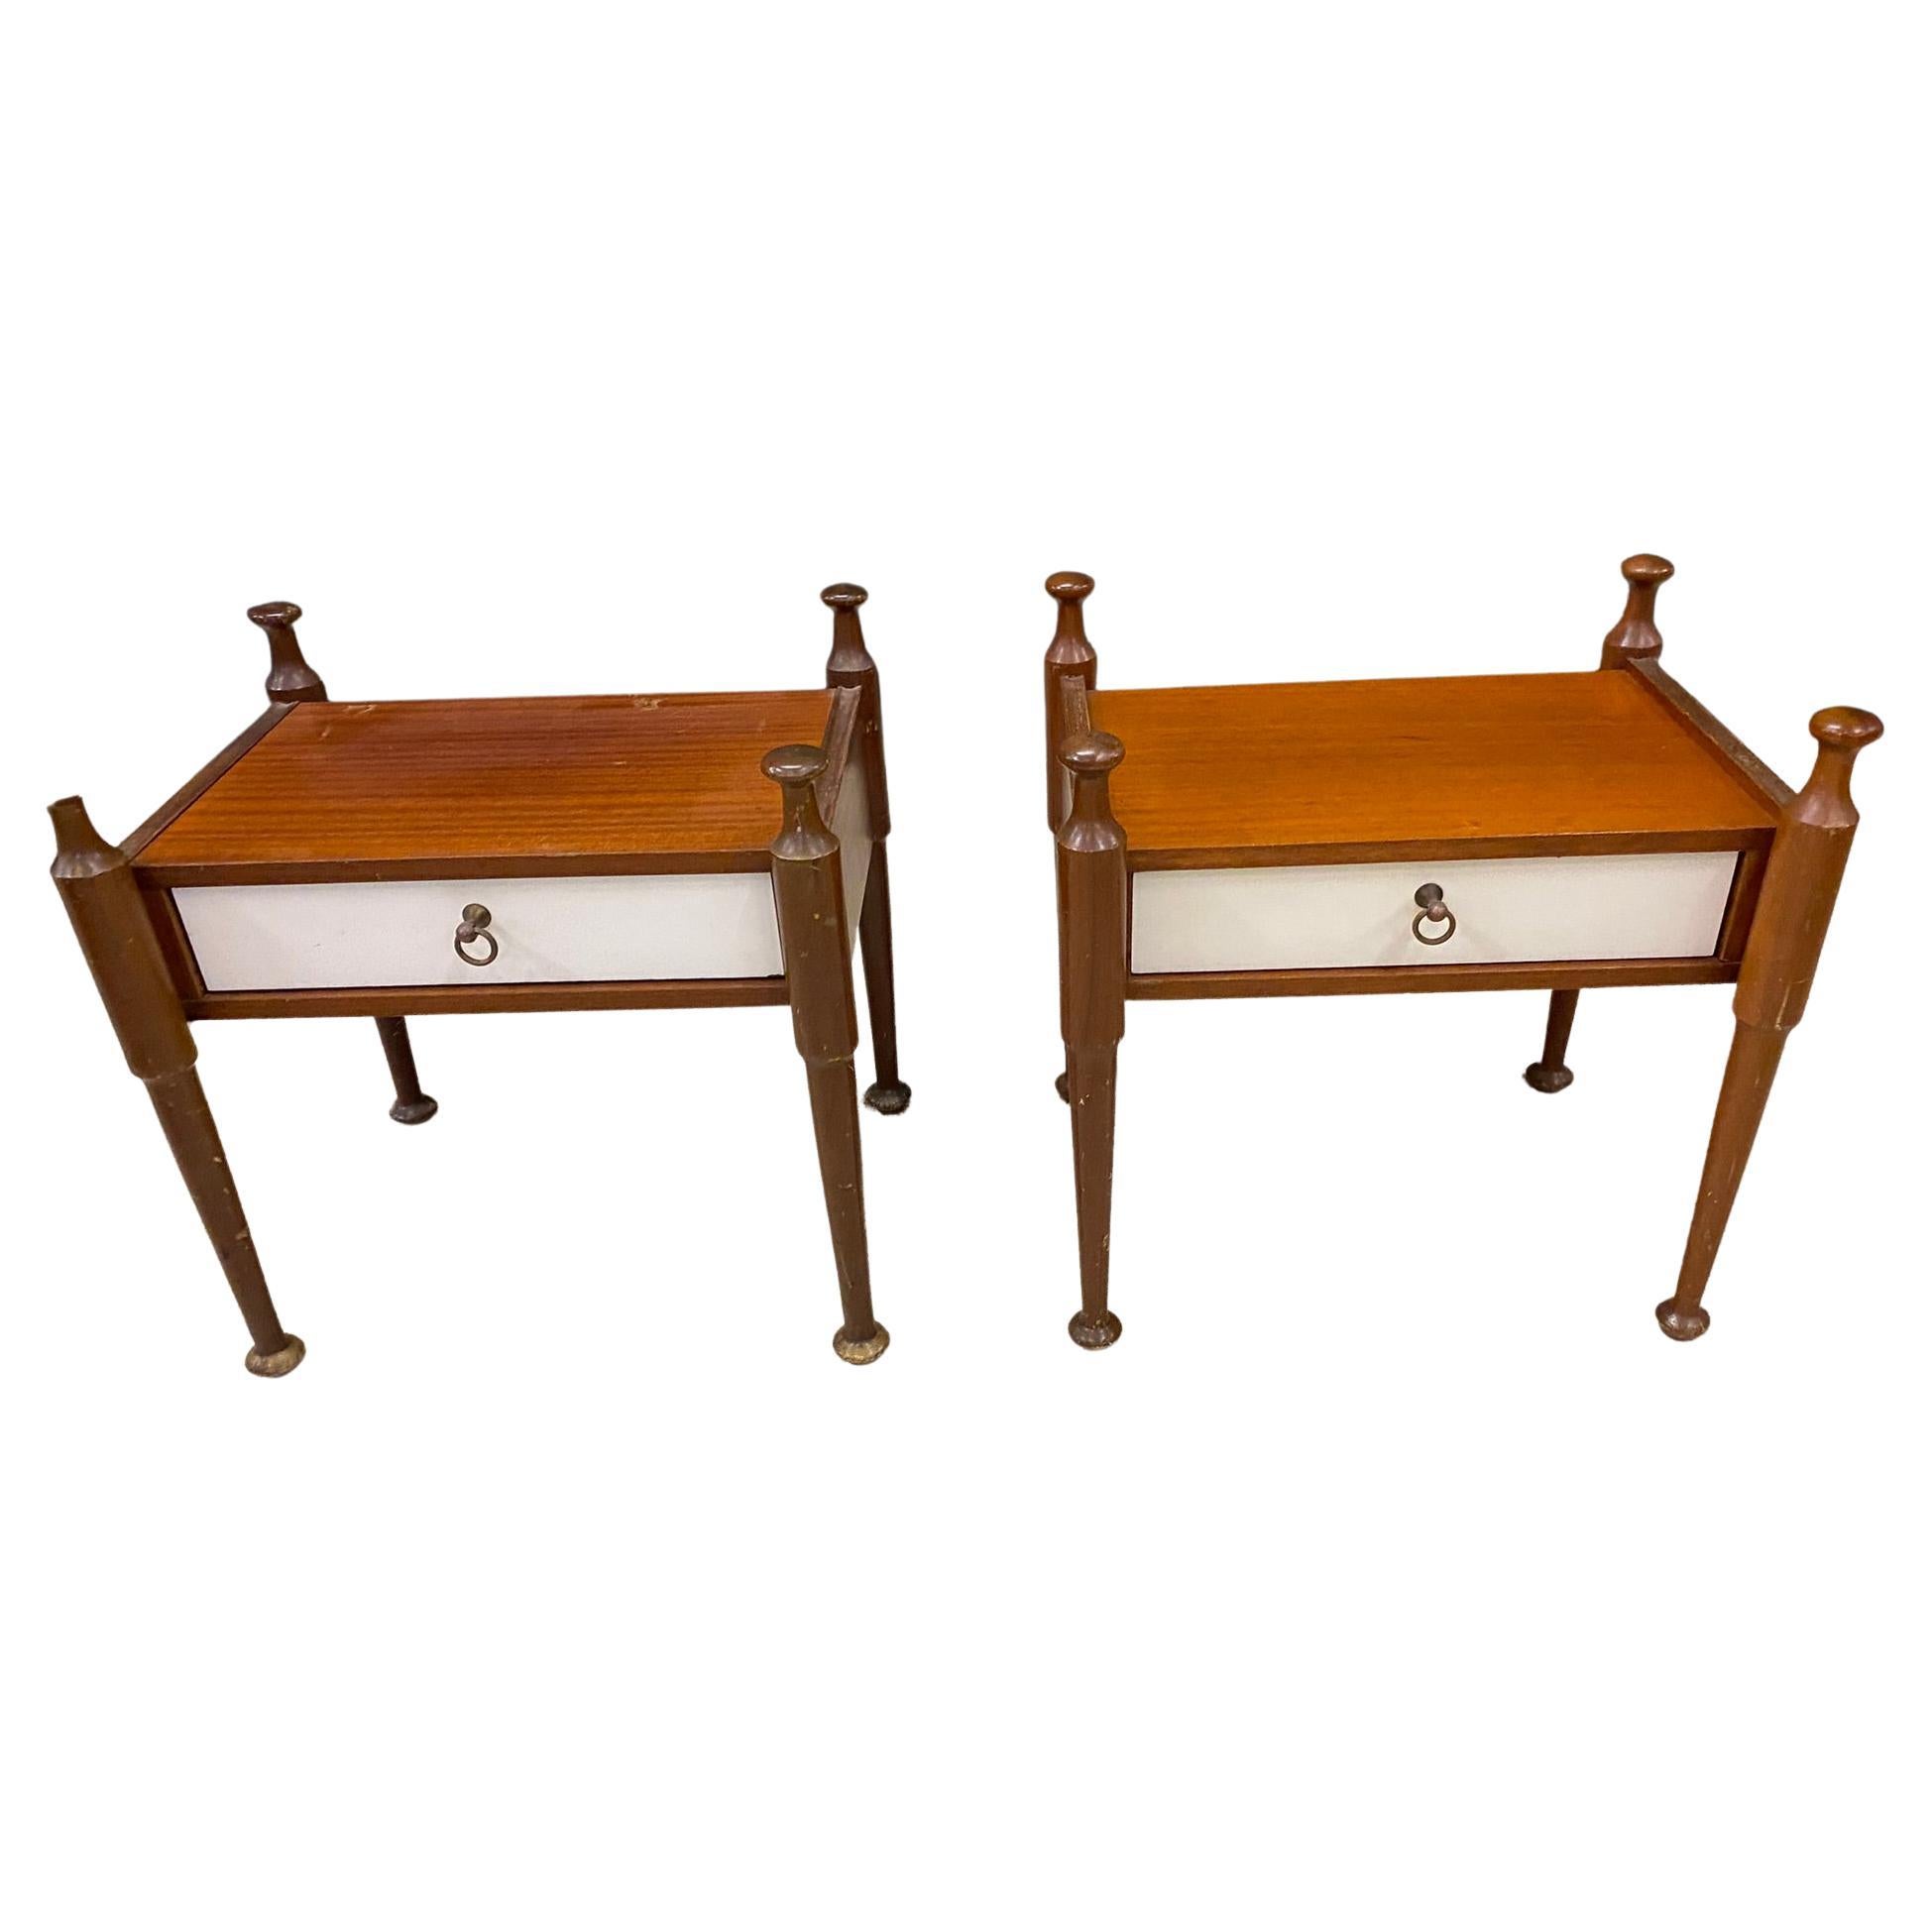 Pair of Bedside Tables, circa 1960